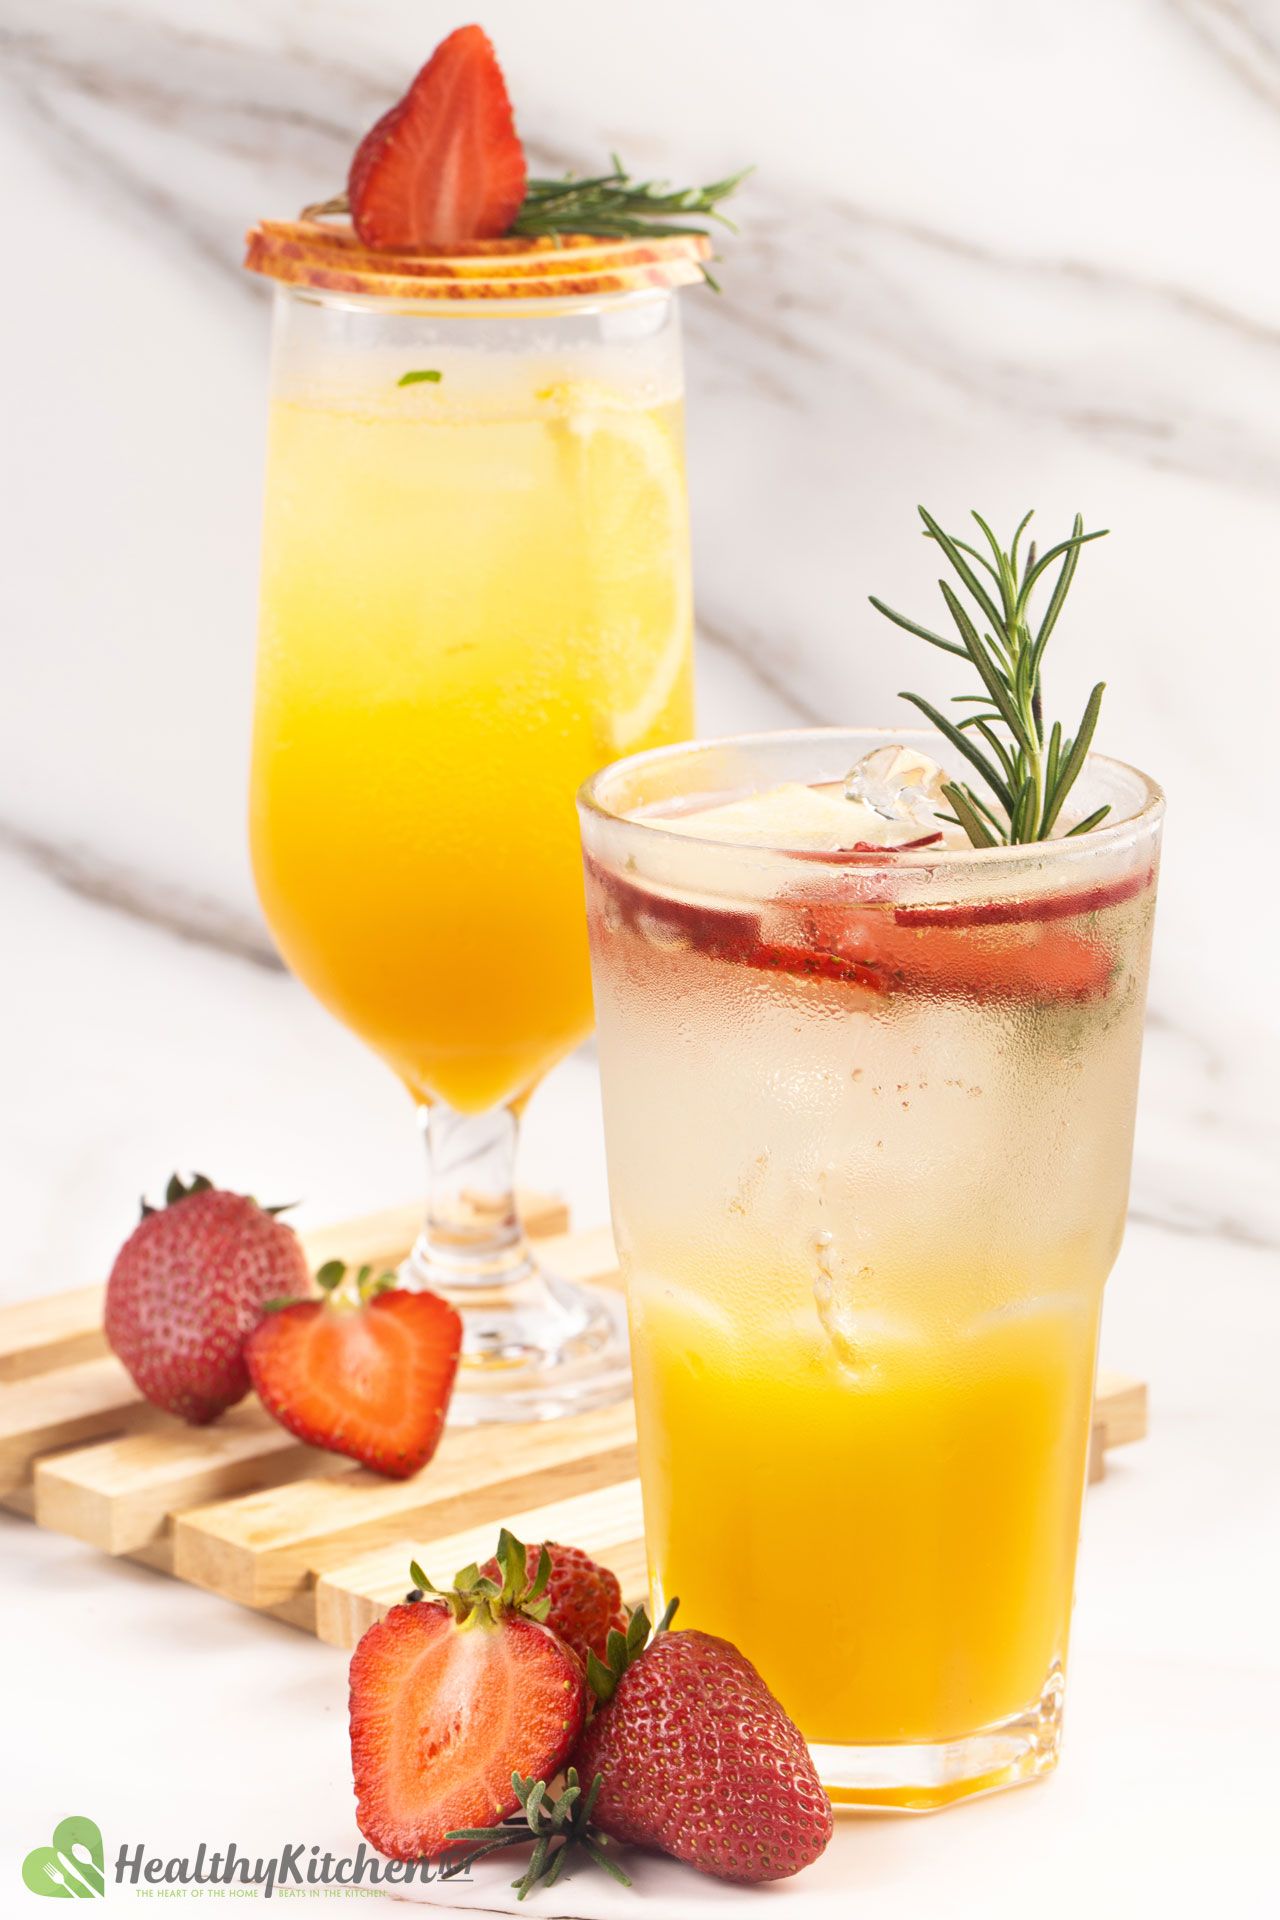 Top 10 Jungle Juice Recipes - Jazzy Summer Party-Punch Beverages